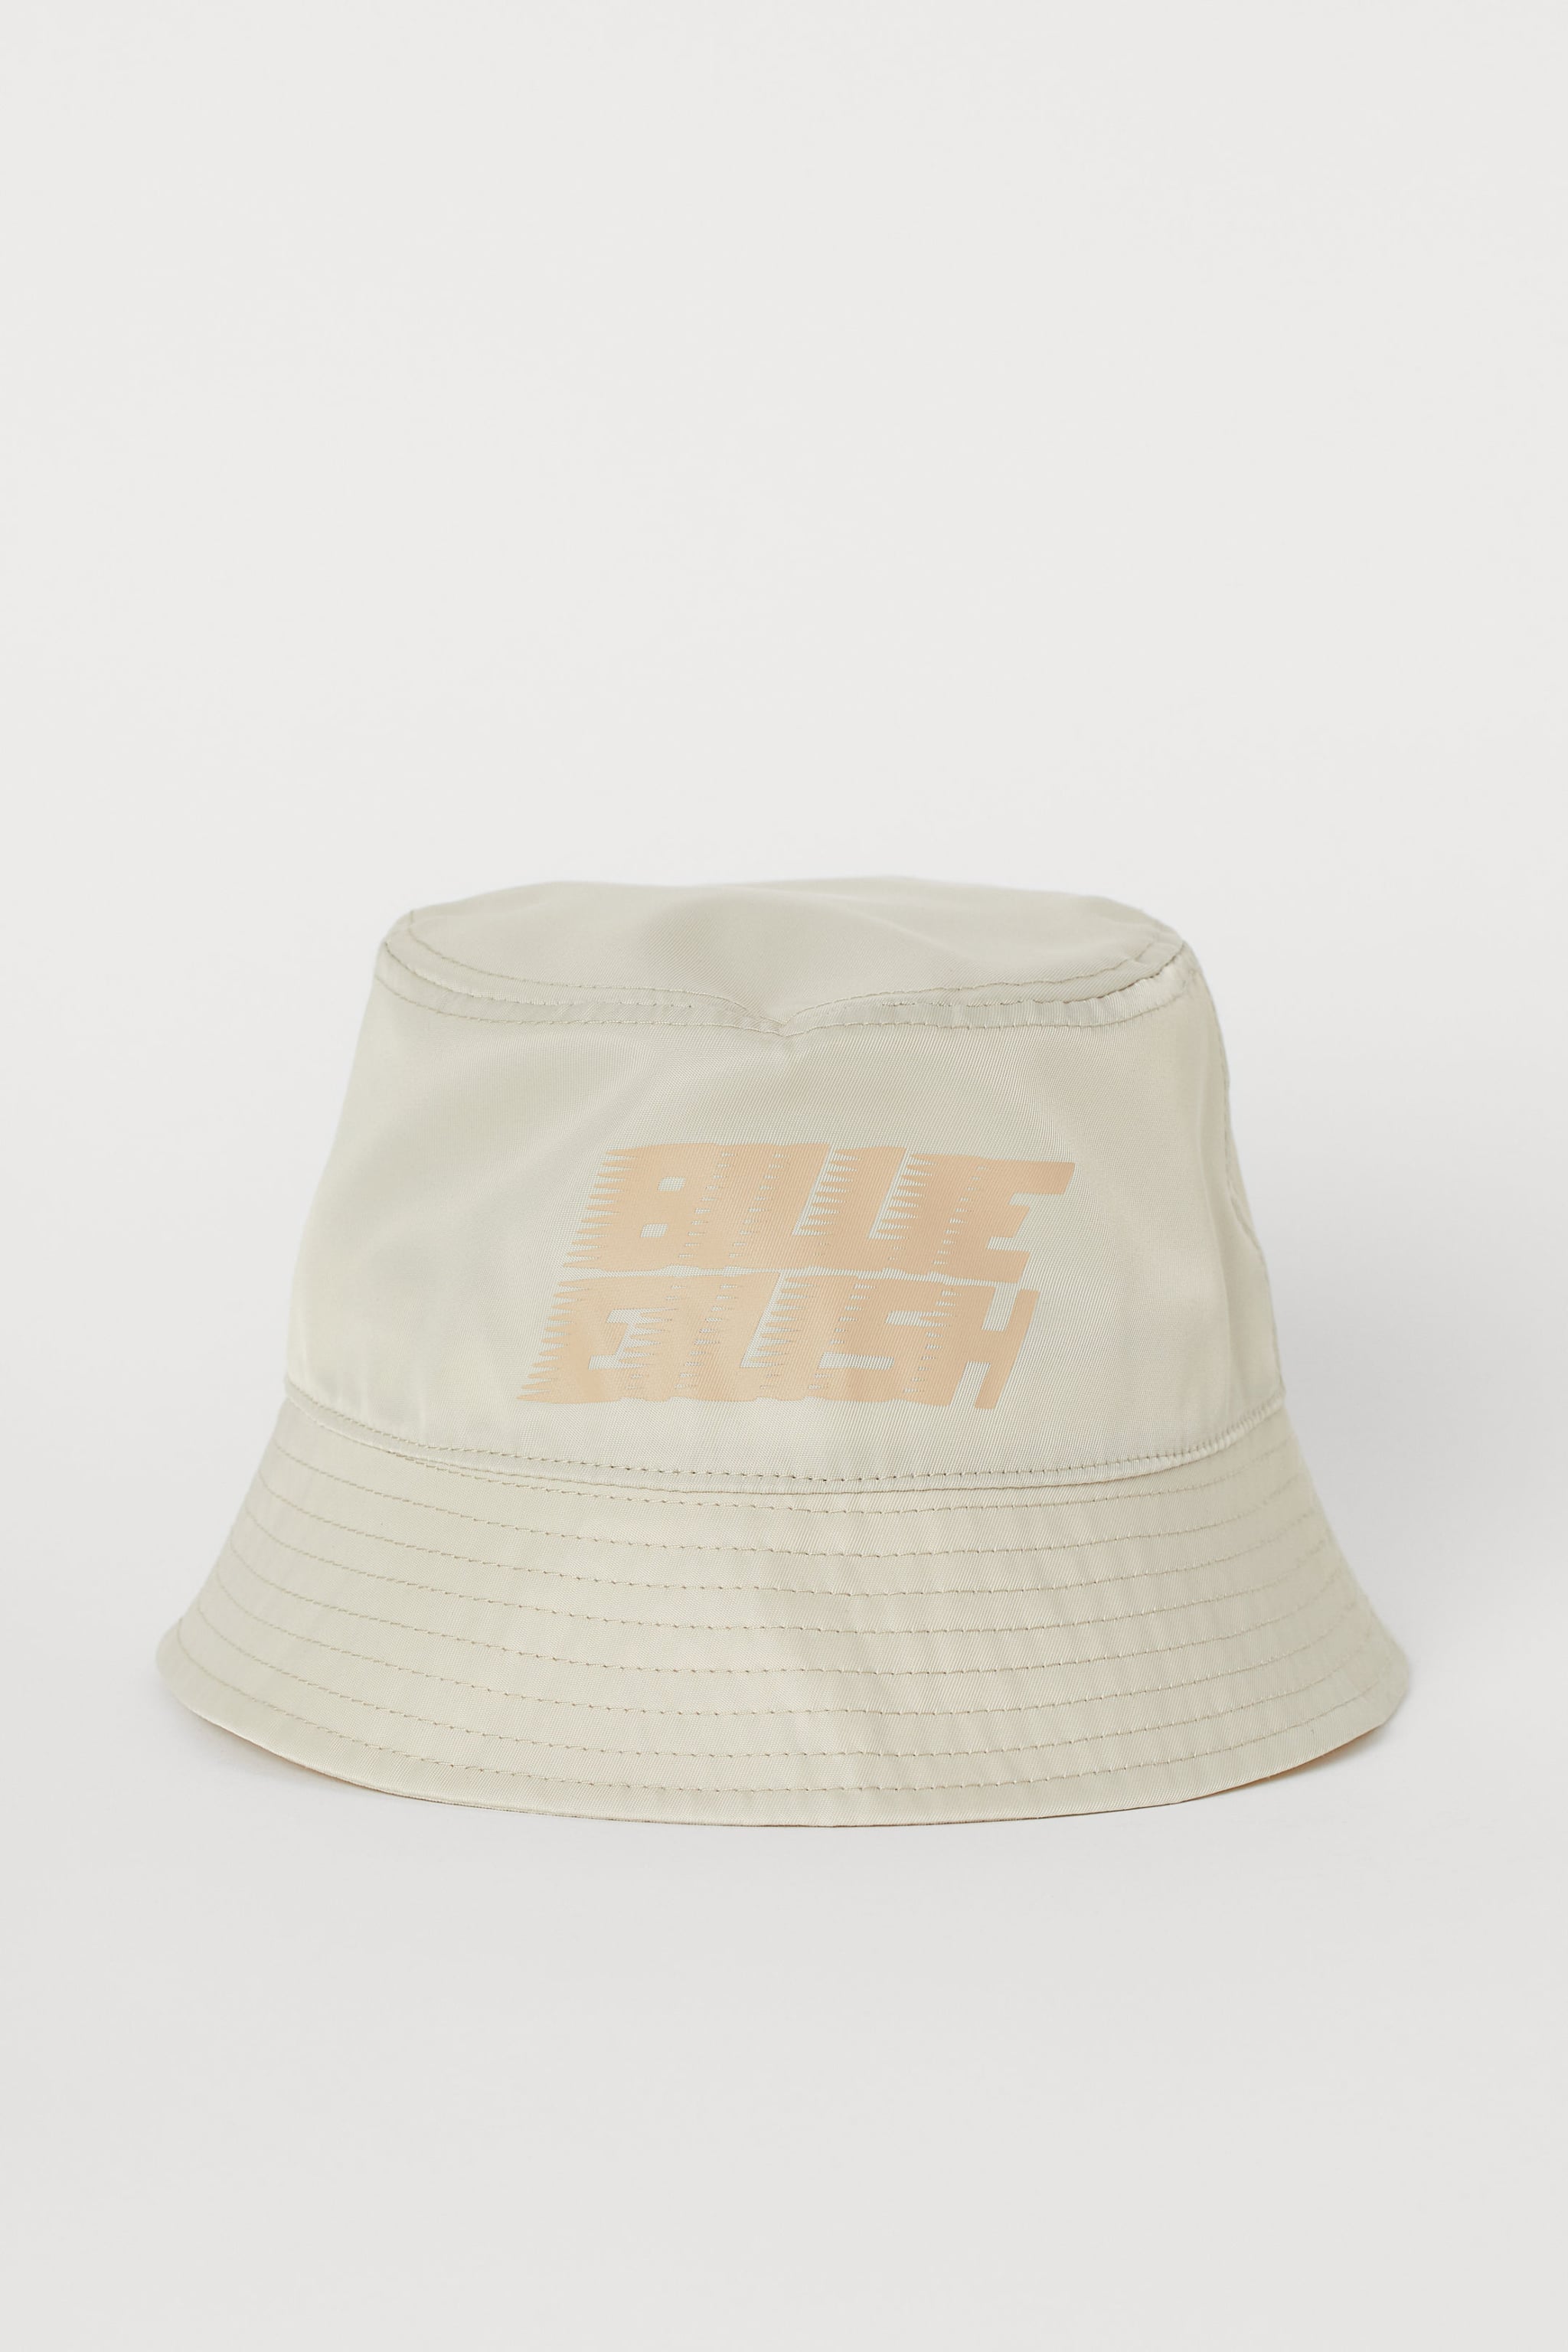 Billie Eilish Printed Bucket Hat At H M H M Just Dropped A